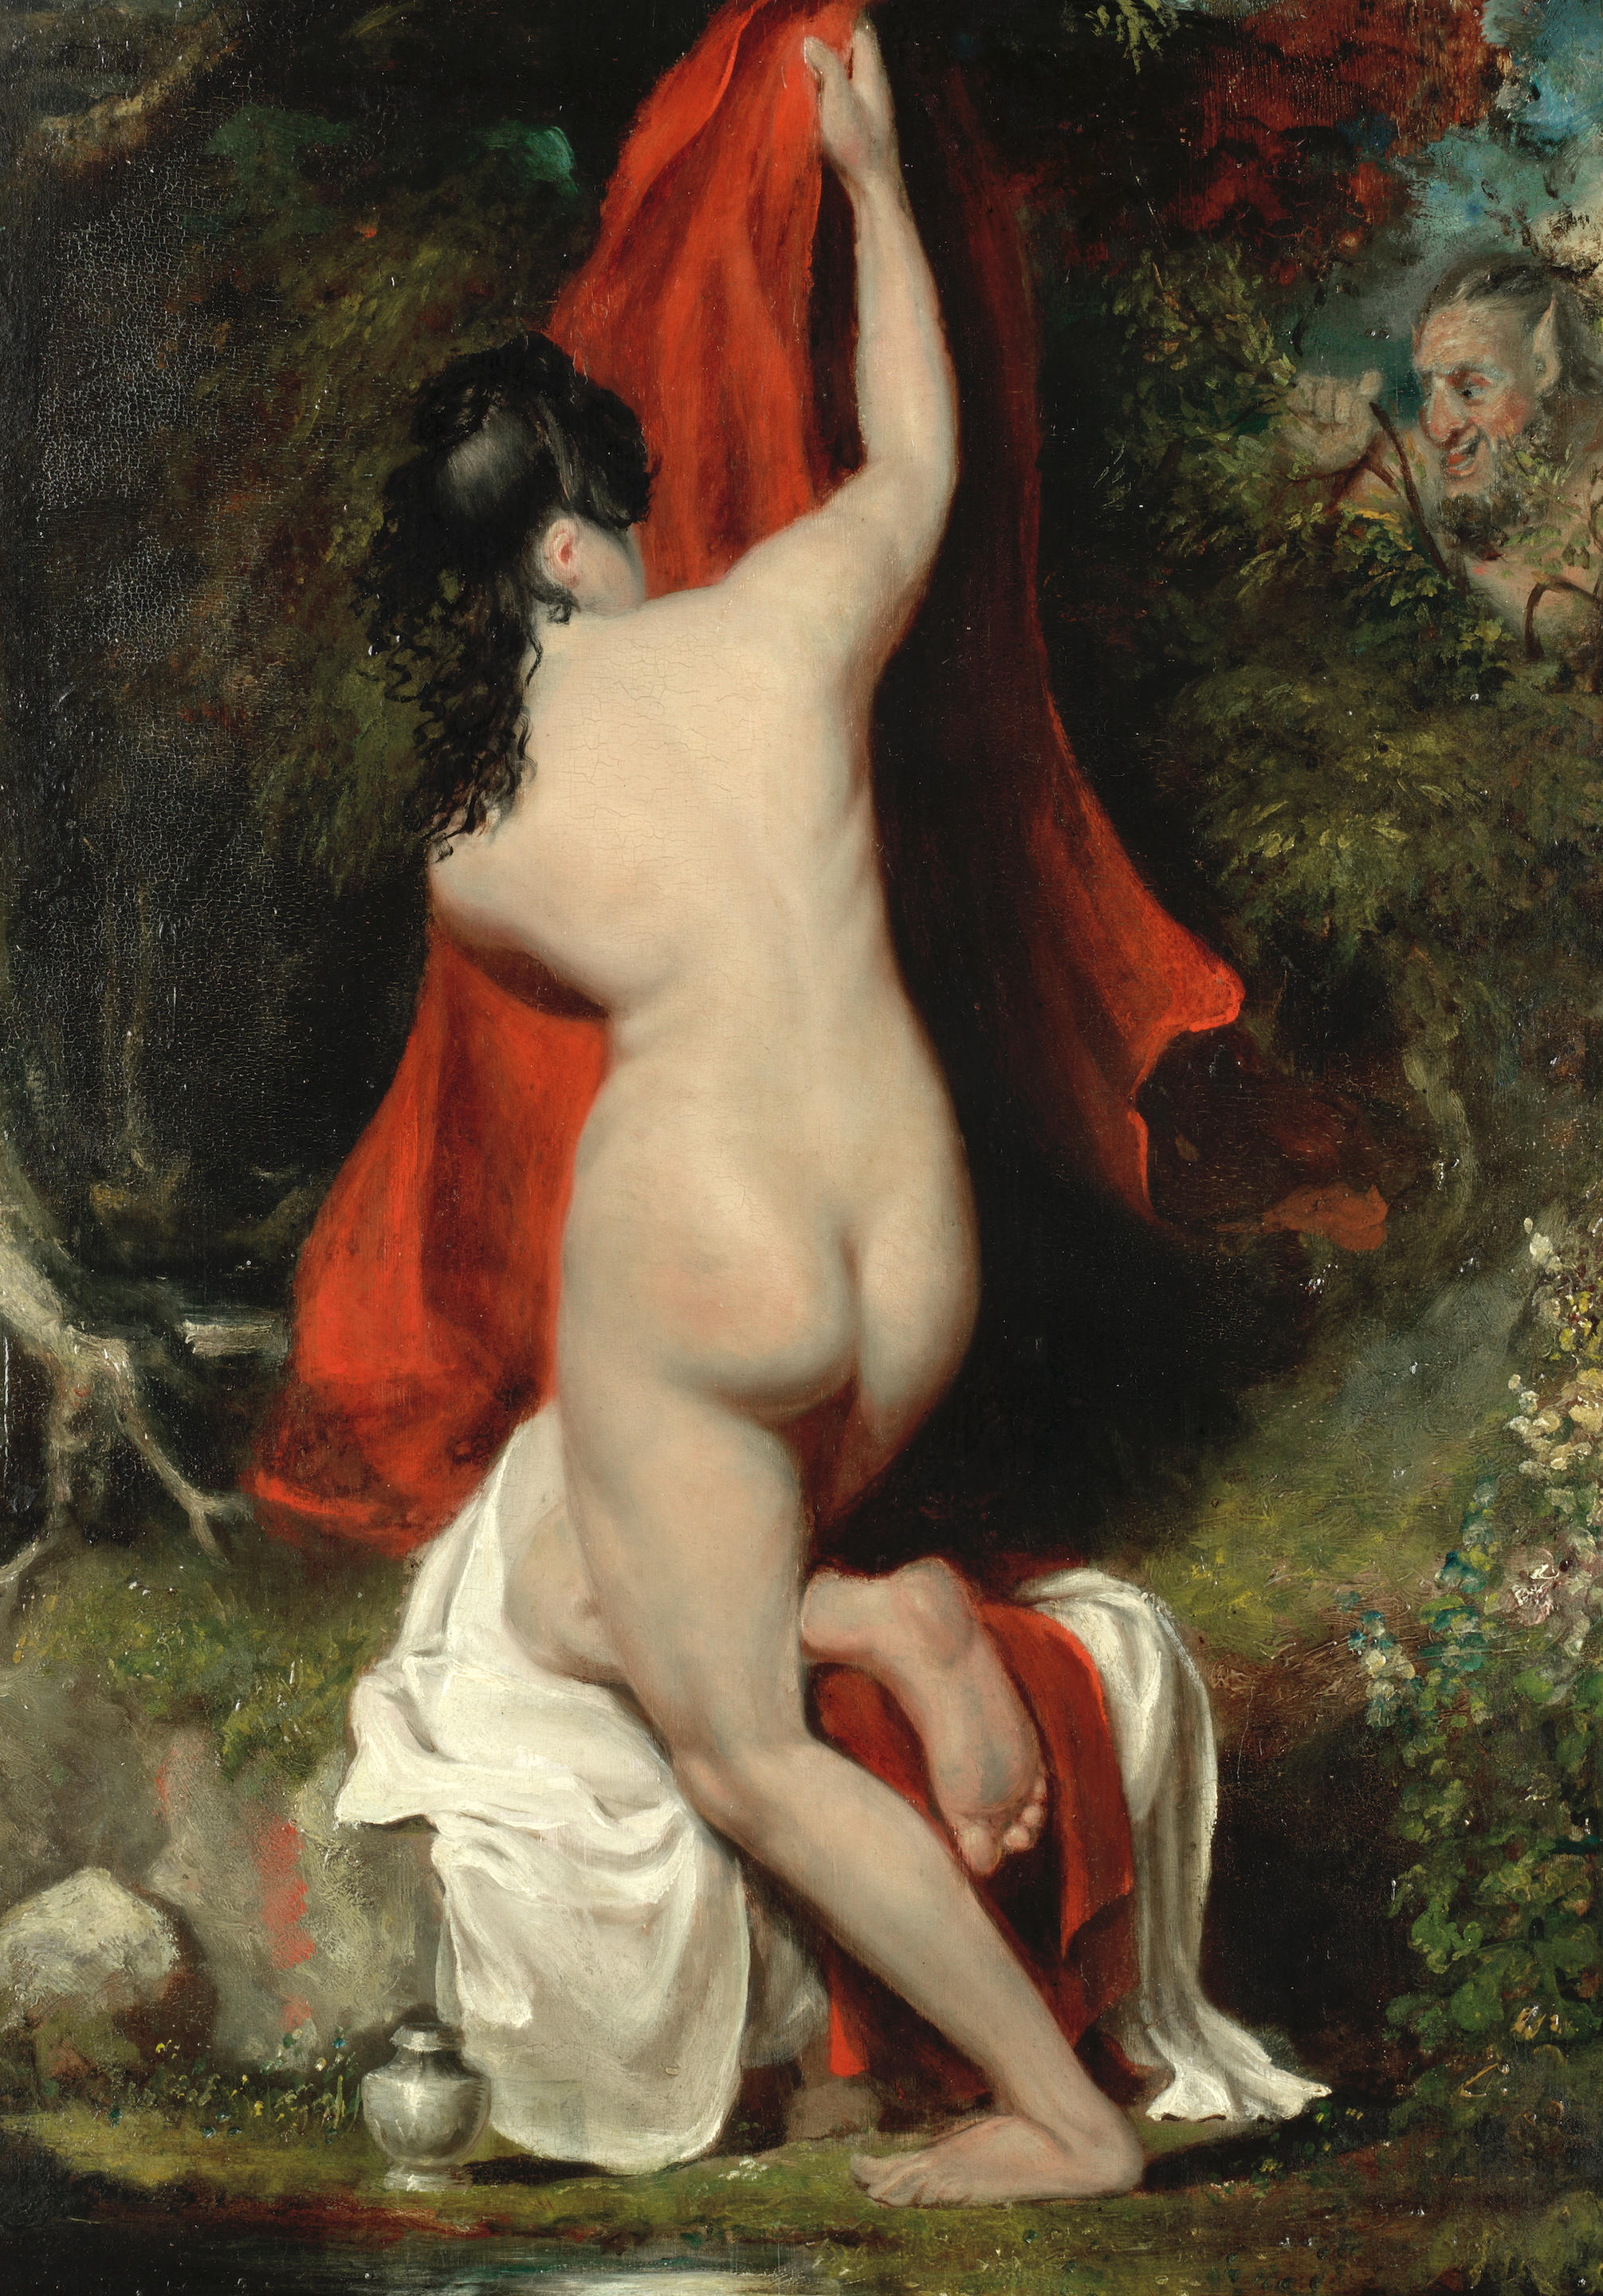 WILLIAM ETTY, R.A., Sleeping female nude, Old Masters including Portrait  Miniatures from the Pohl-Ströher Collection, 2020